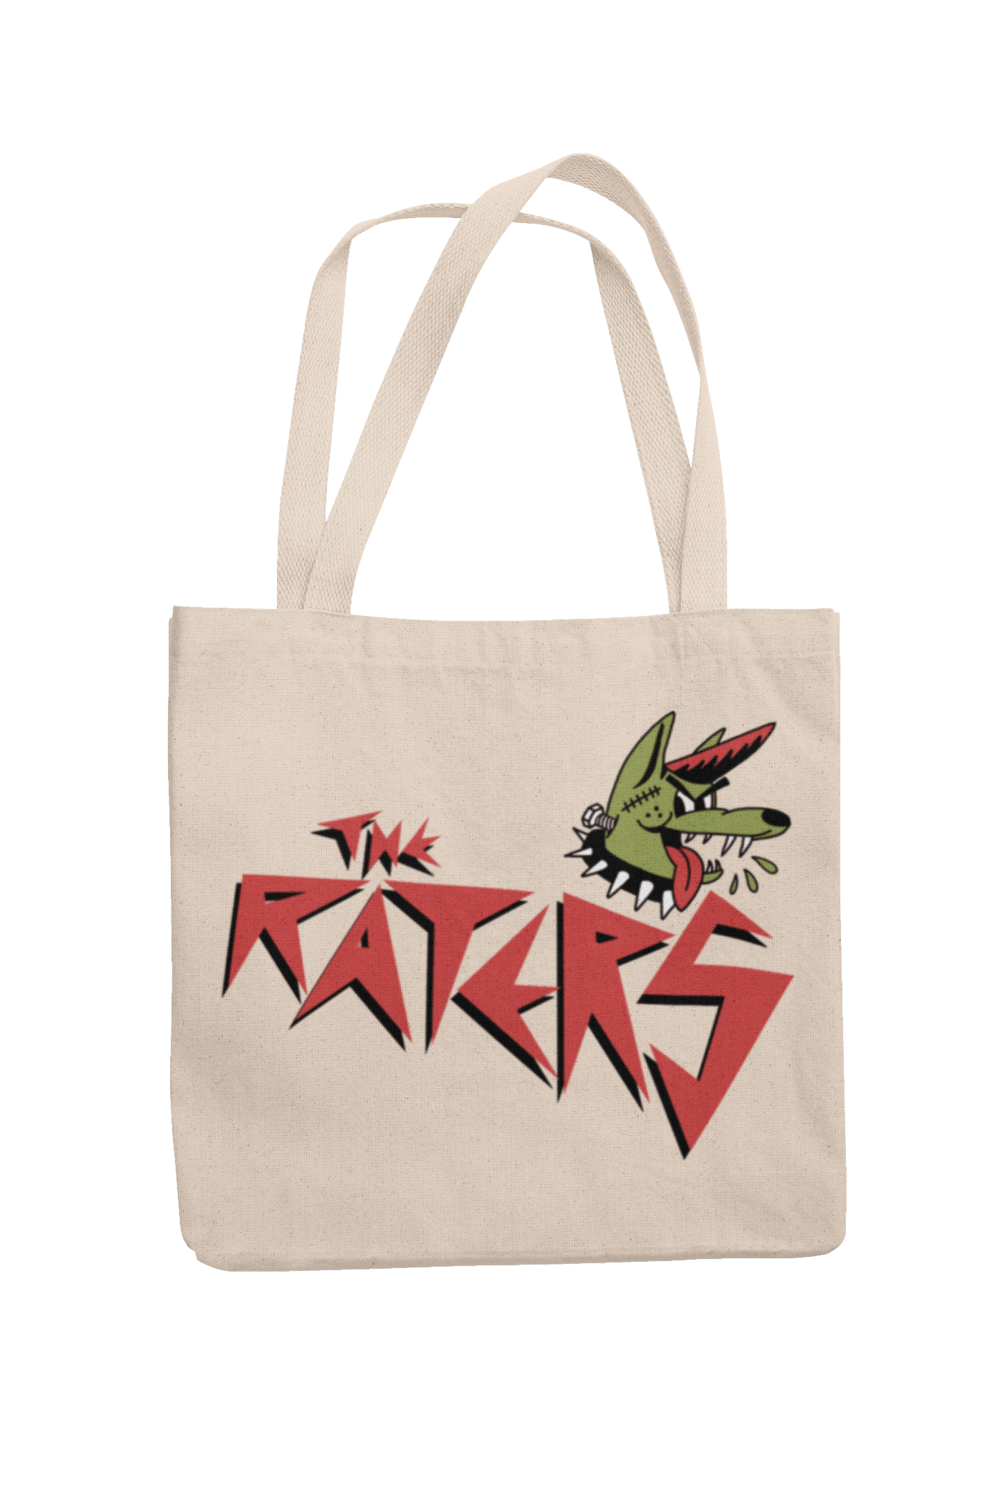 THE RATERS Cotton Bag  LOGO